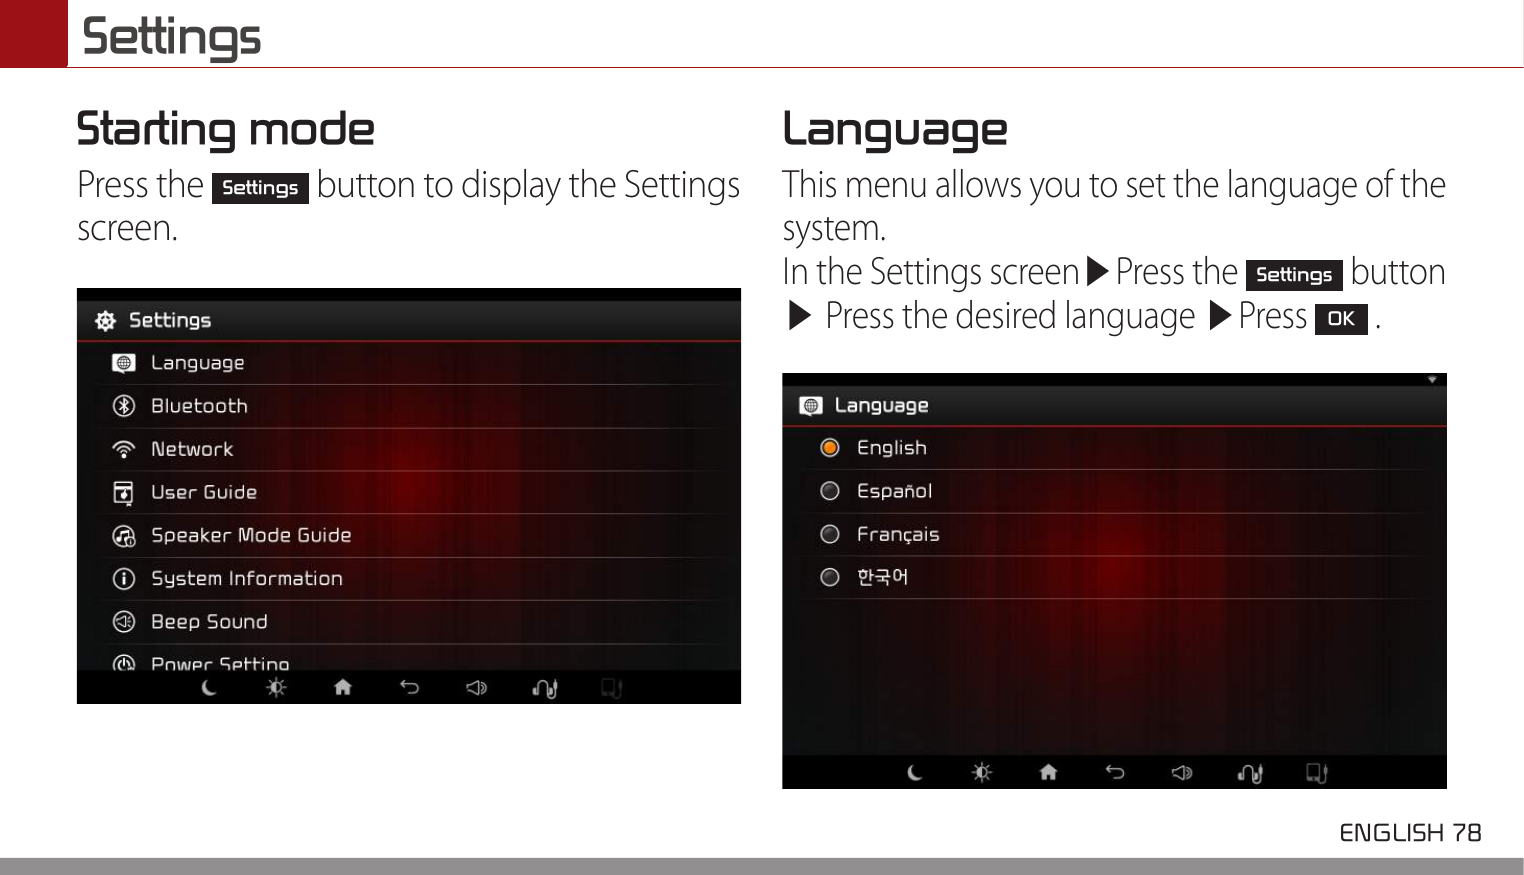 Settings ENGLISH 78 Starting modePress the Settings button to display the Settings screen.Language This menu allows you to set the language of the system.In the Settings screen▶Press the Settings button ▶ Press the desired language ▶Press OK .